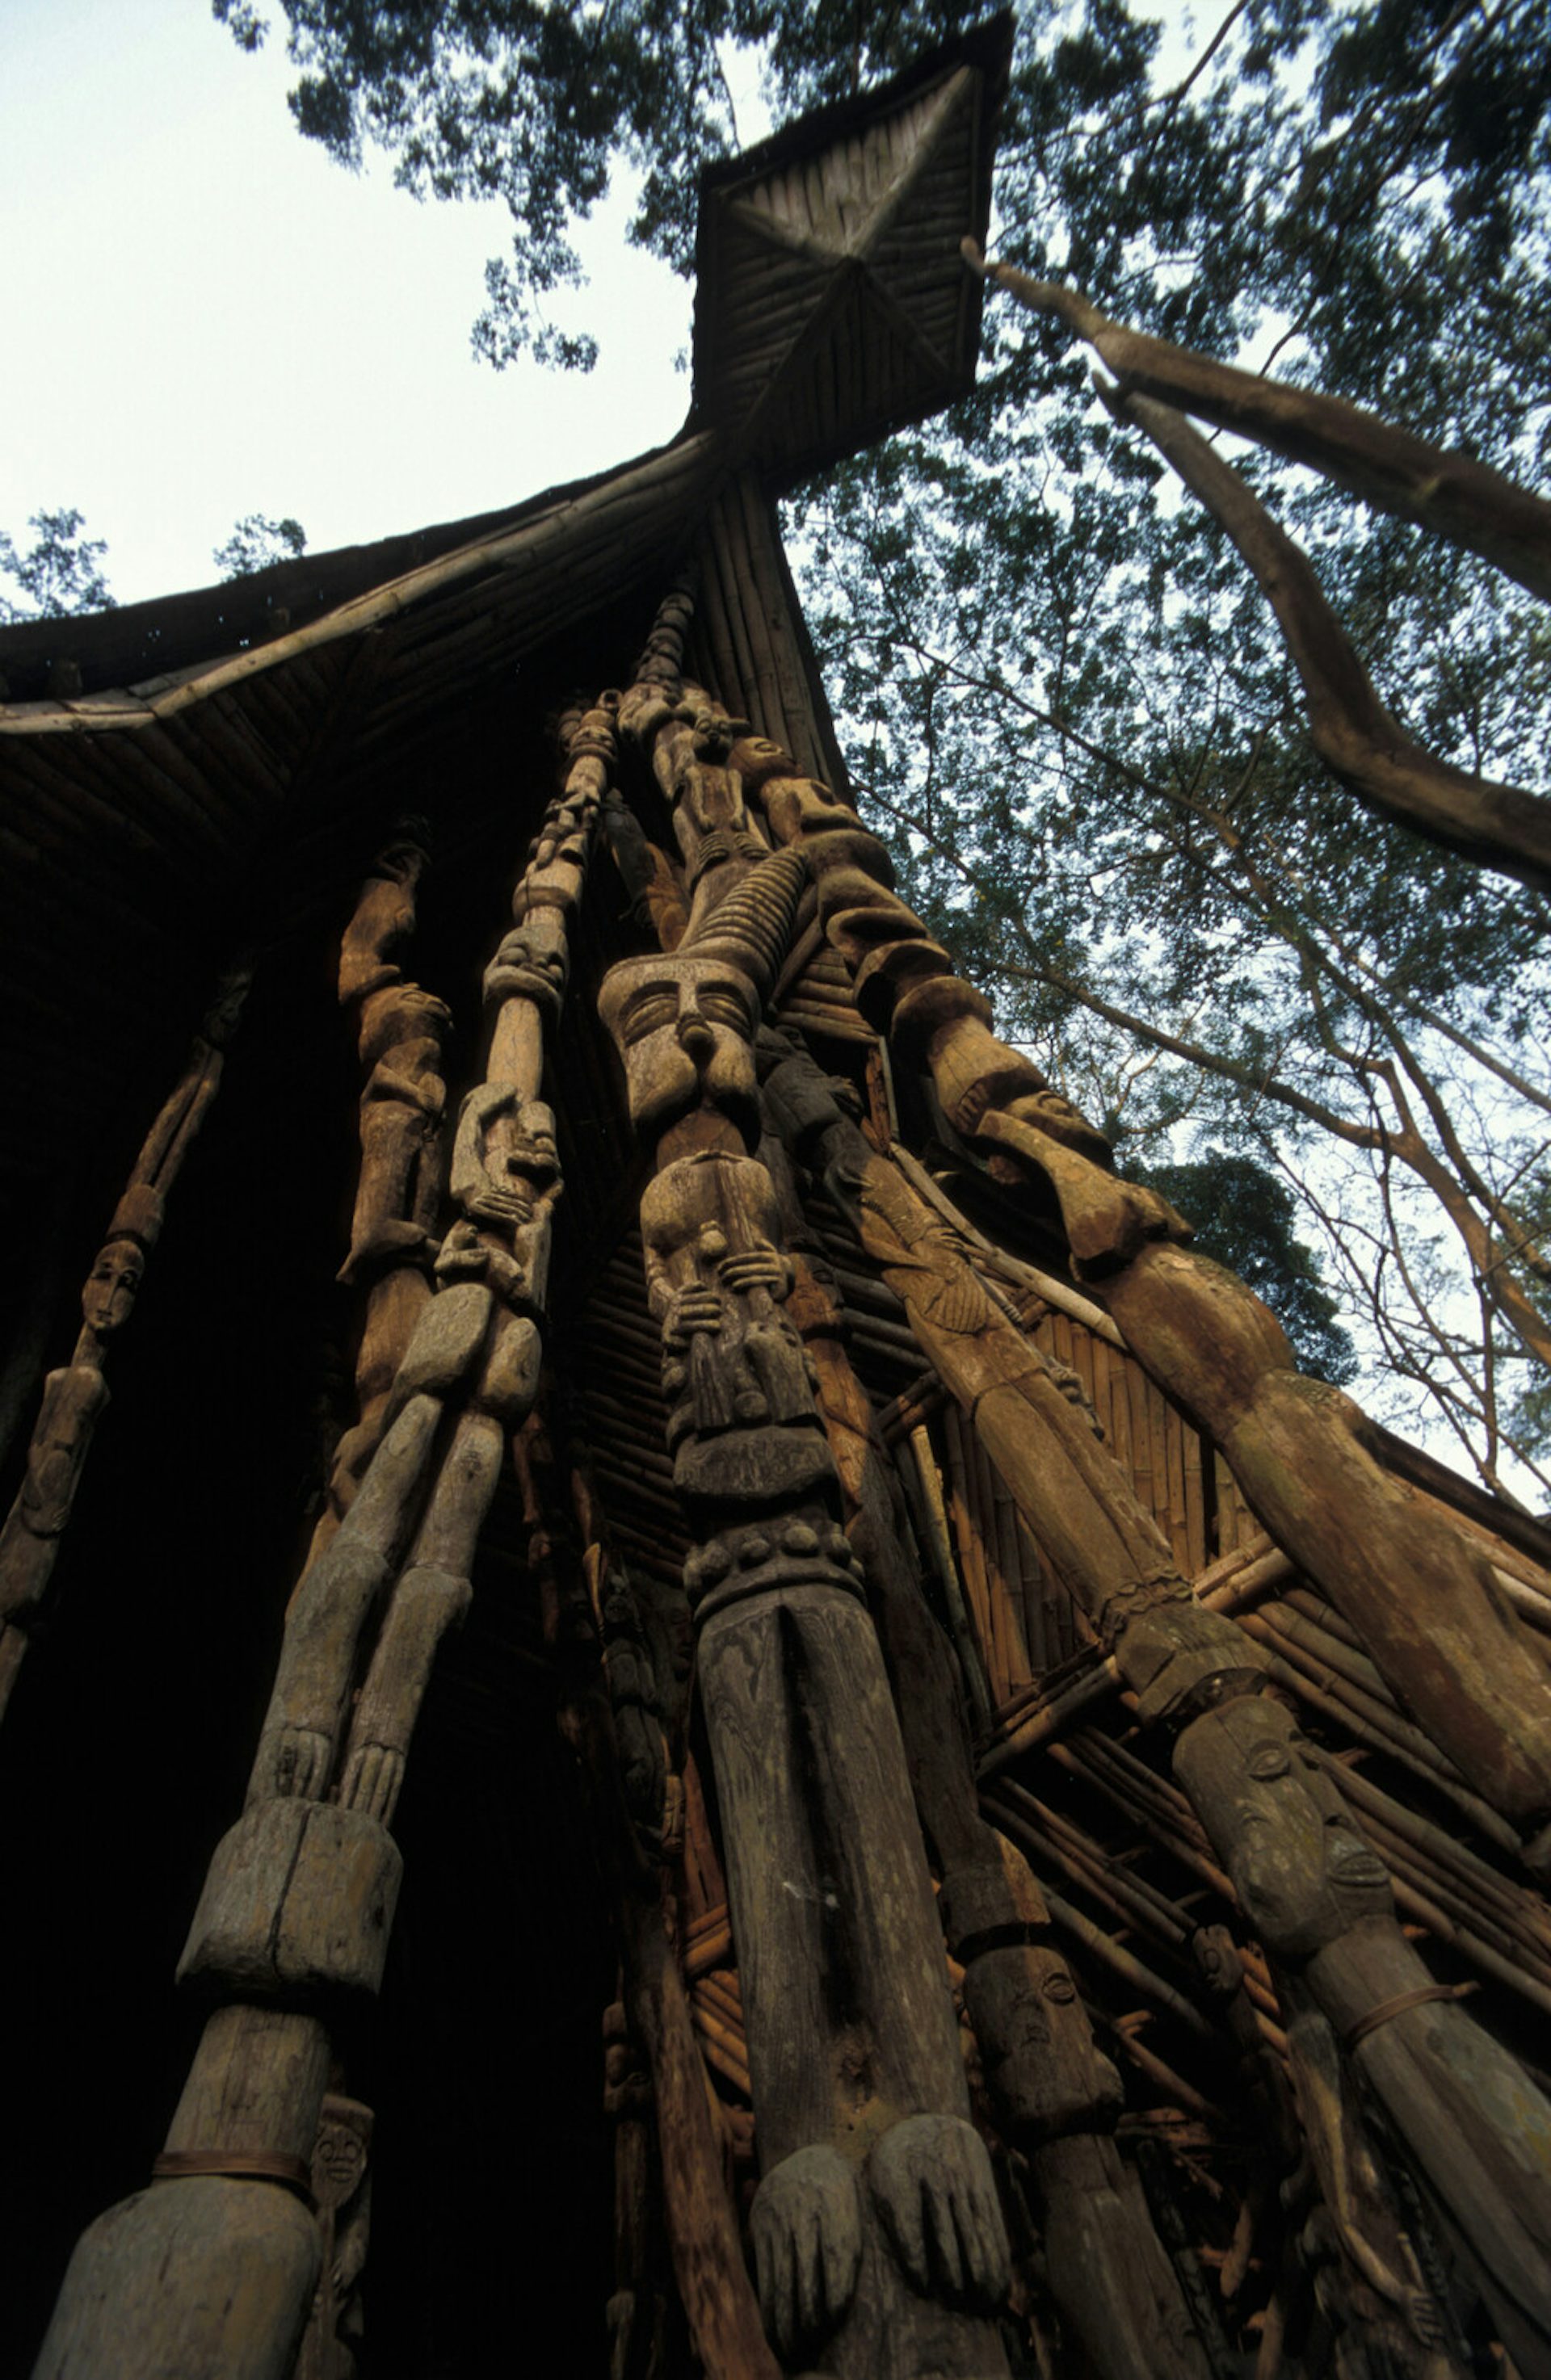 Osun-Osogbo Sacred Grove by Thierry Joffroy (n.d.)